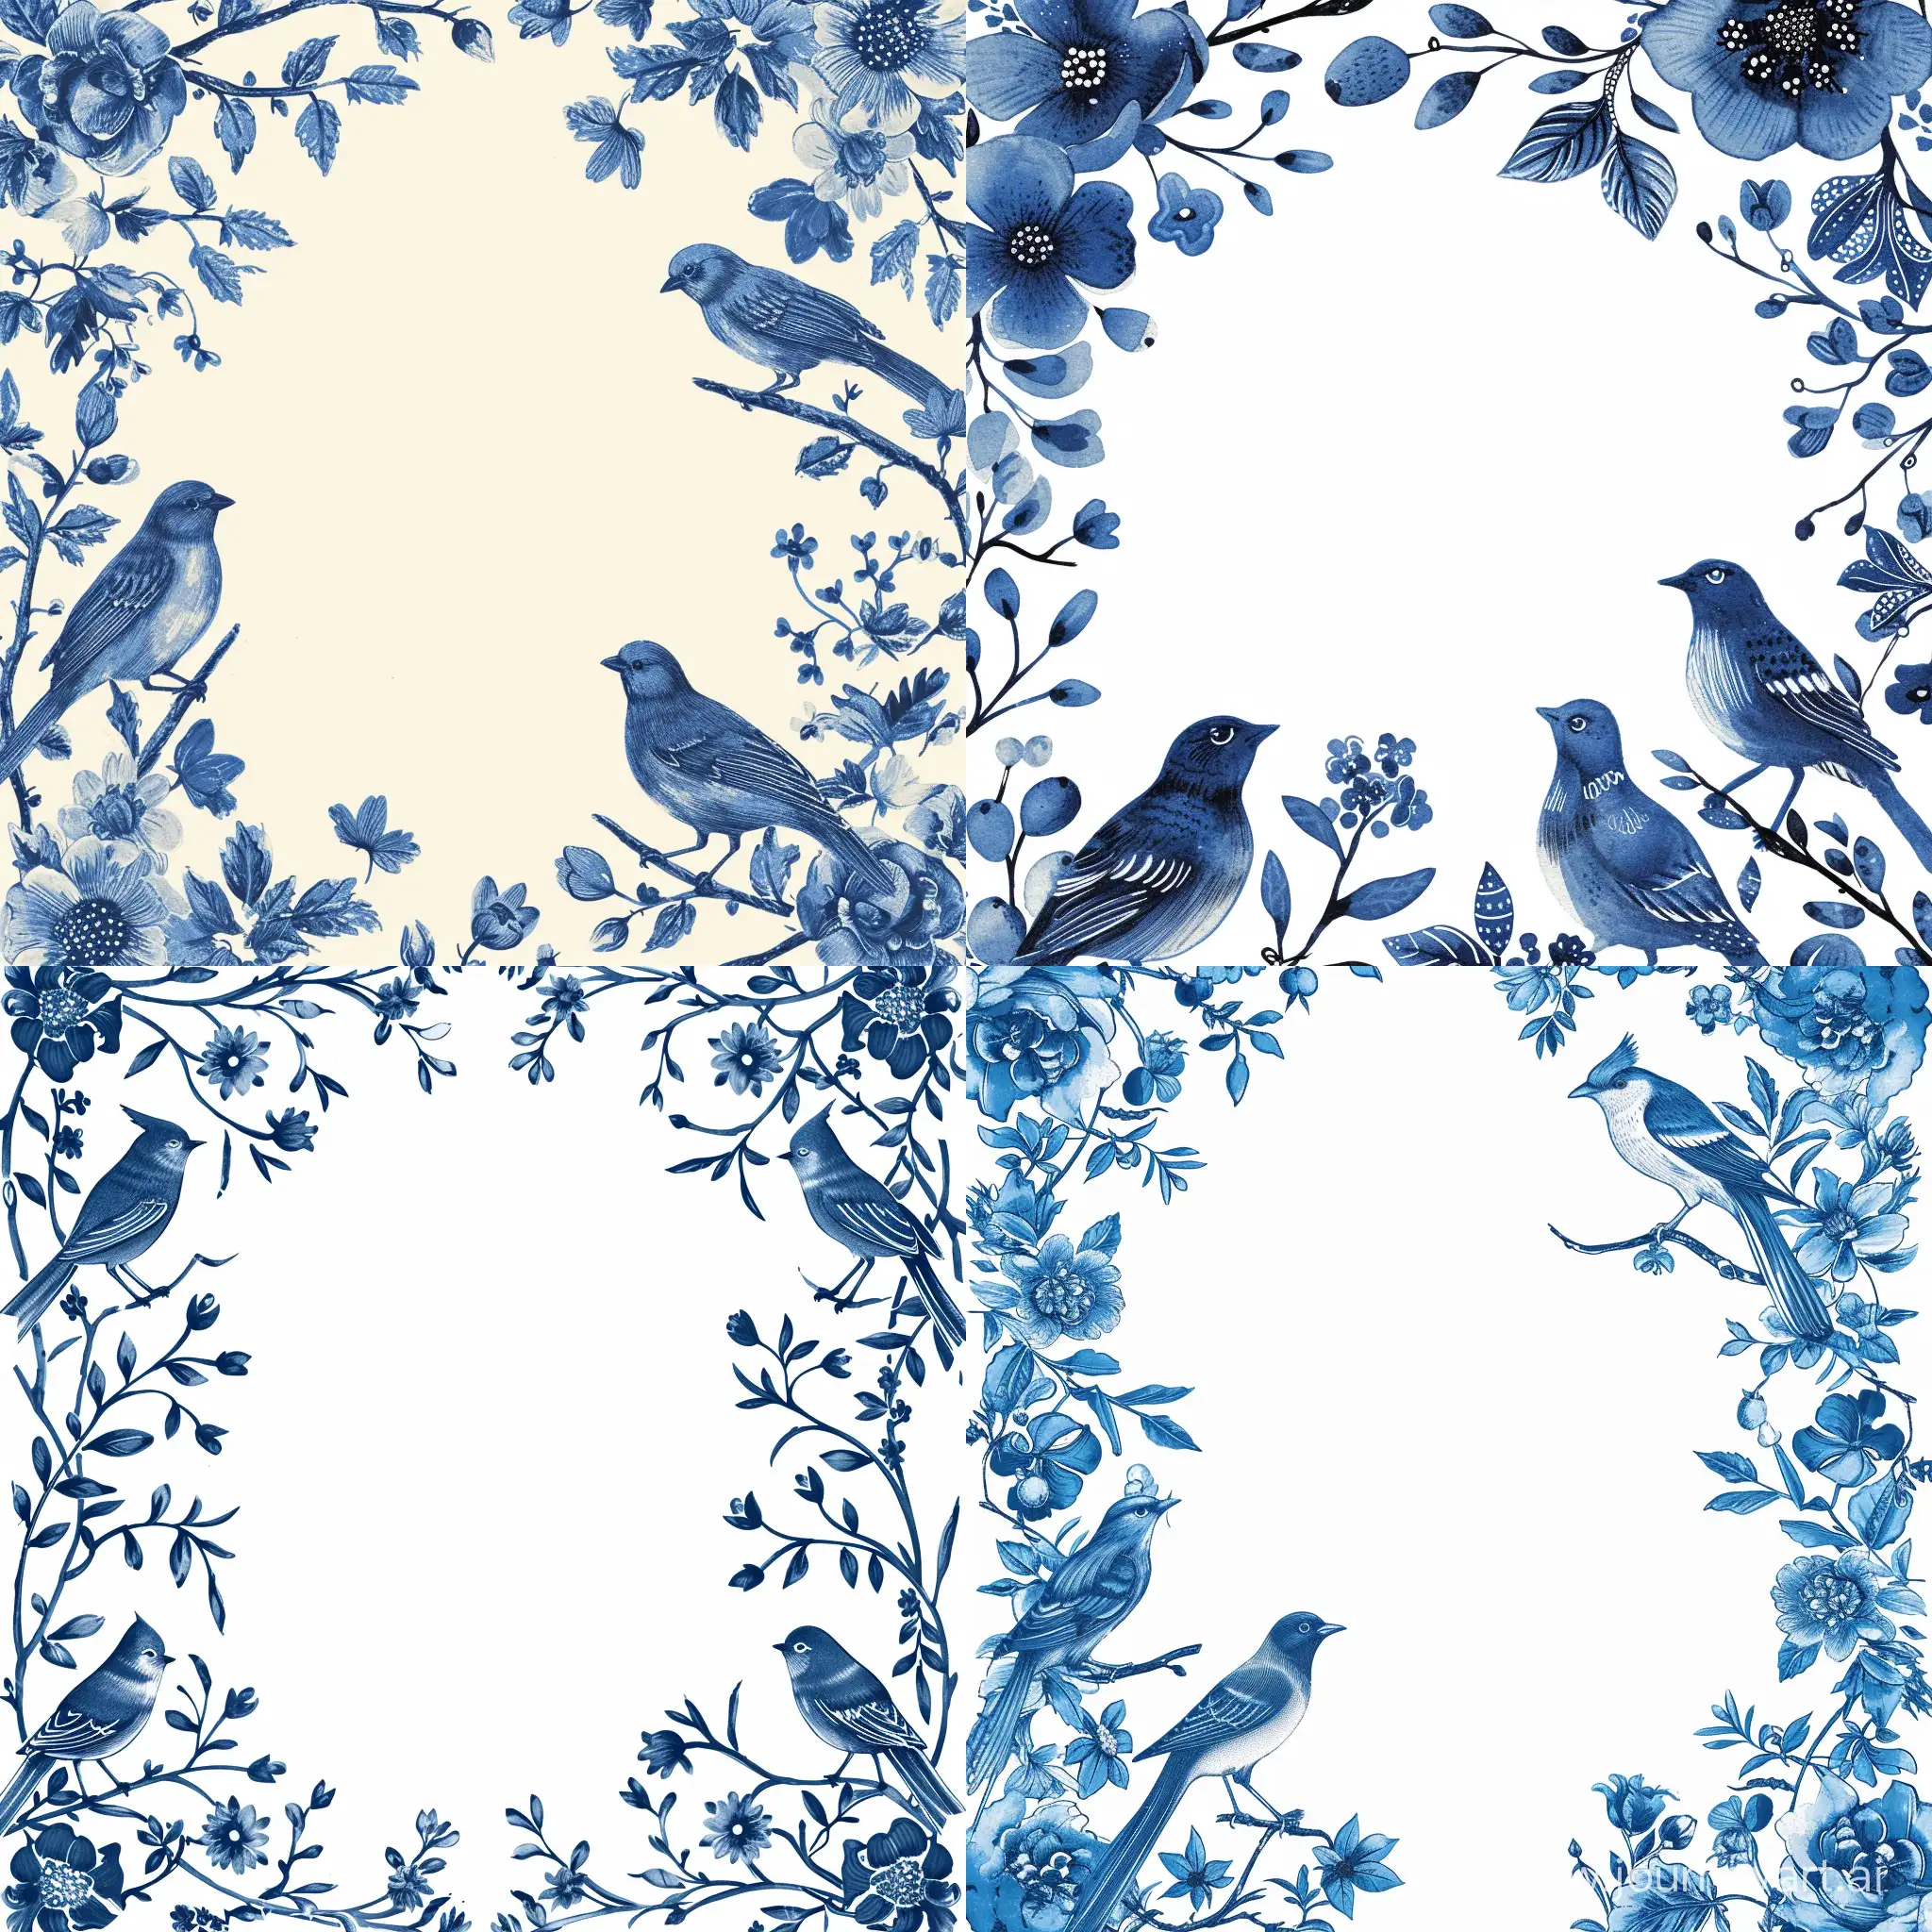 blue chinoiserie, birds and floral elements, suitable for wedding invitation, near edges leave white space in the middle, ar 4:3